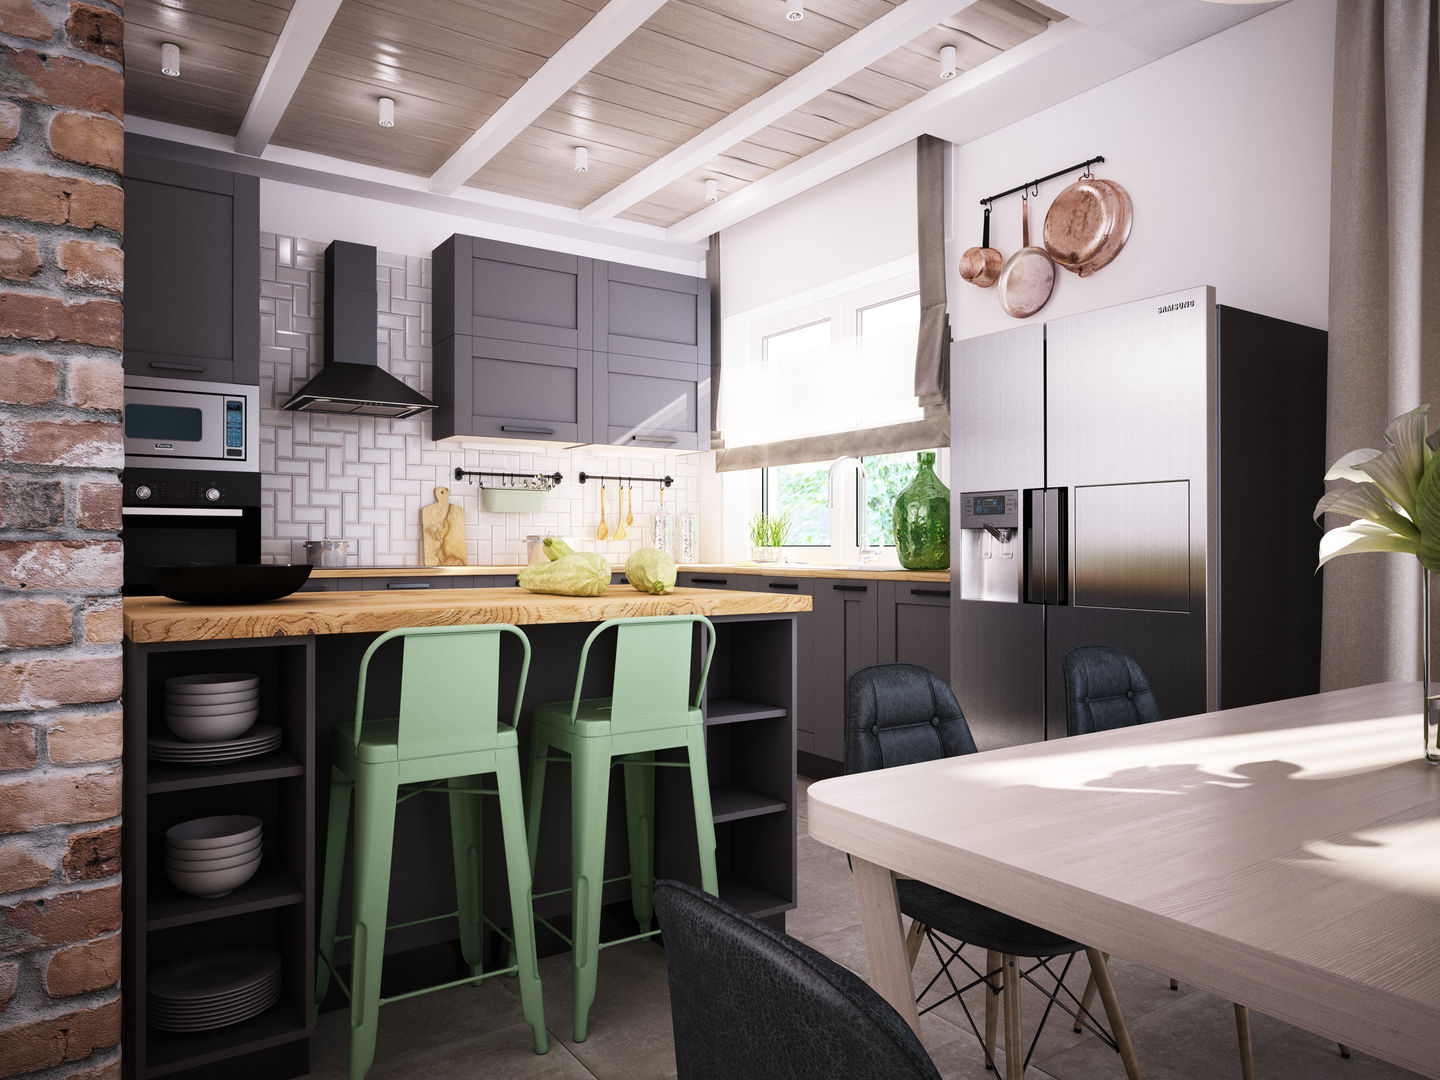 homify Industrial style kitchen